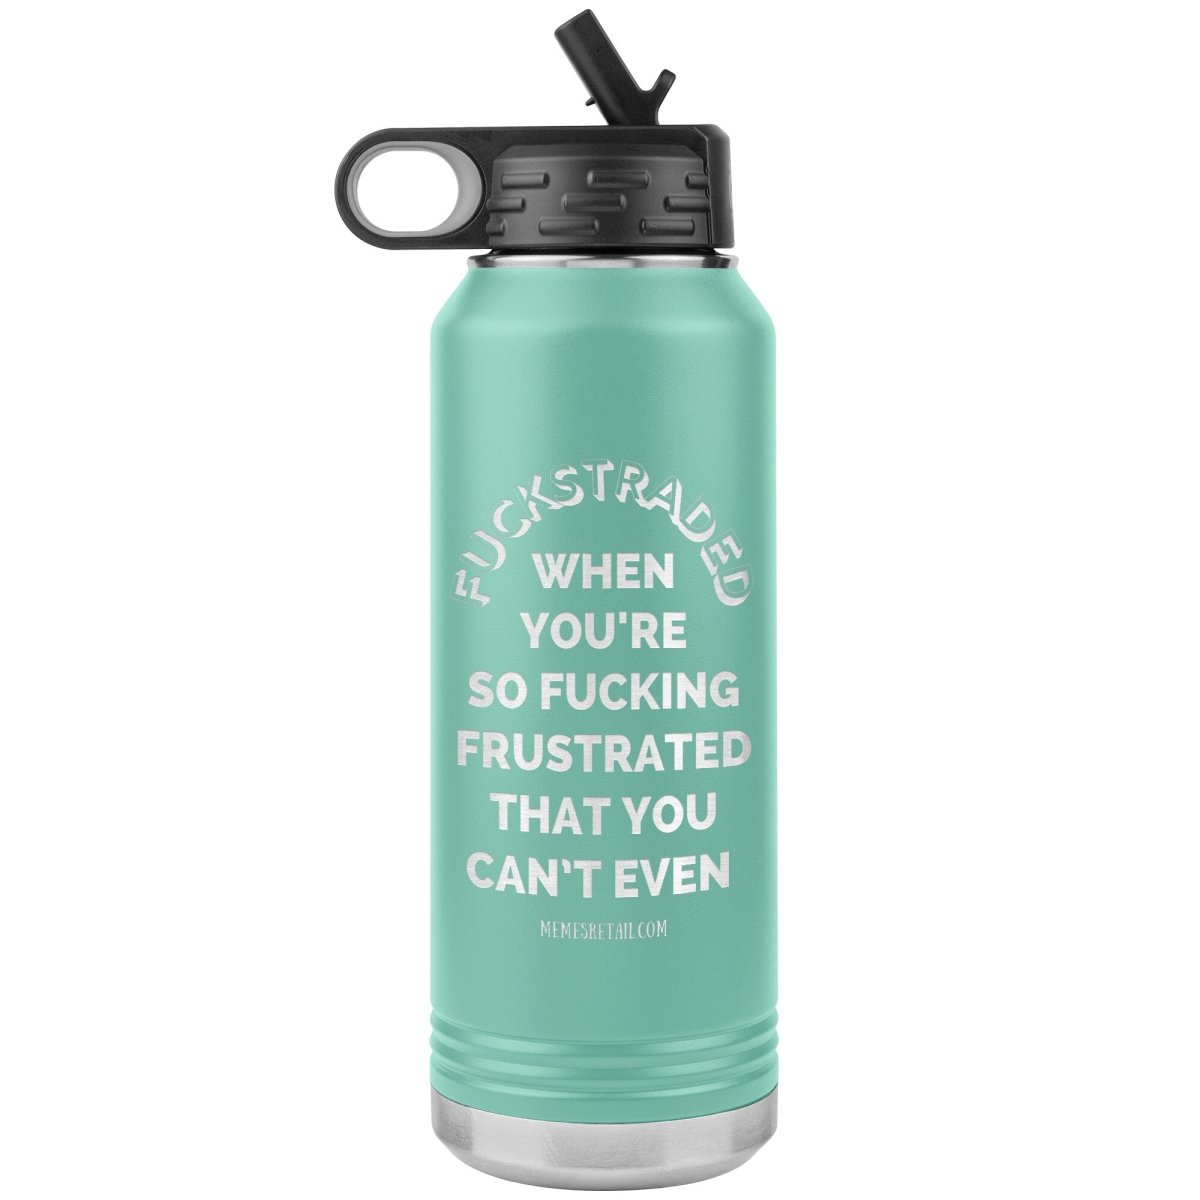 Fuckstraded, When You're So Fucking Frustrated That You Can’t Even - 32oz Water Tumblers, Teal - MemesRetail.com